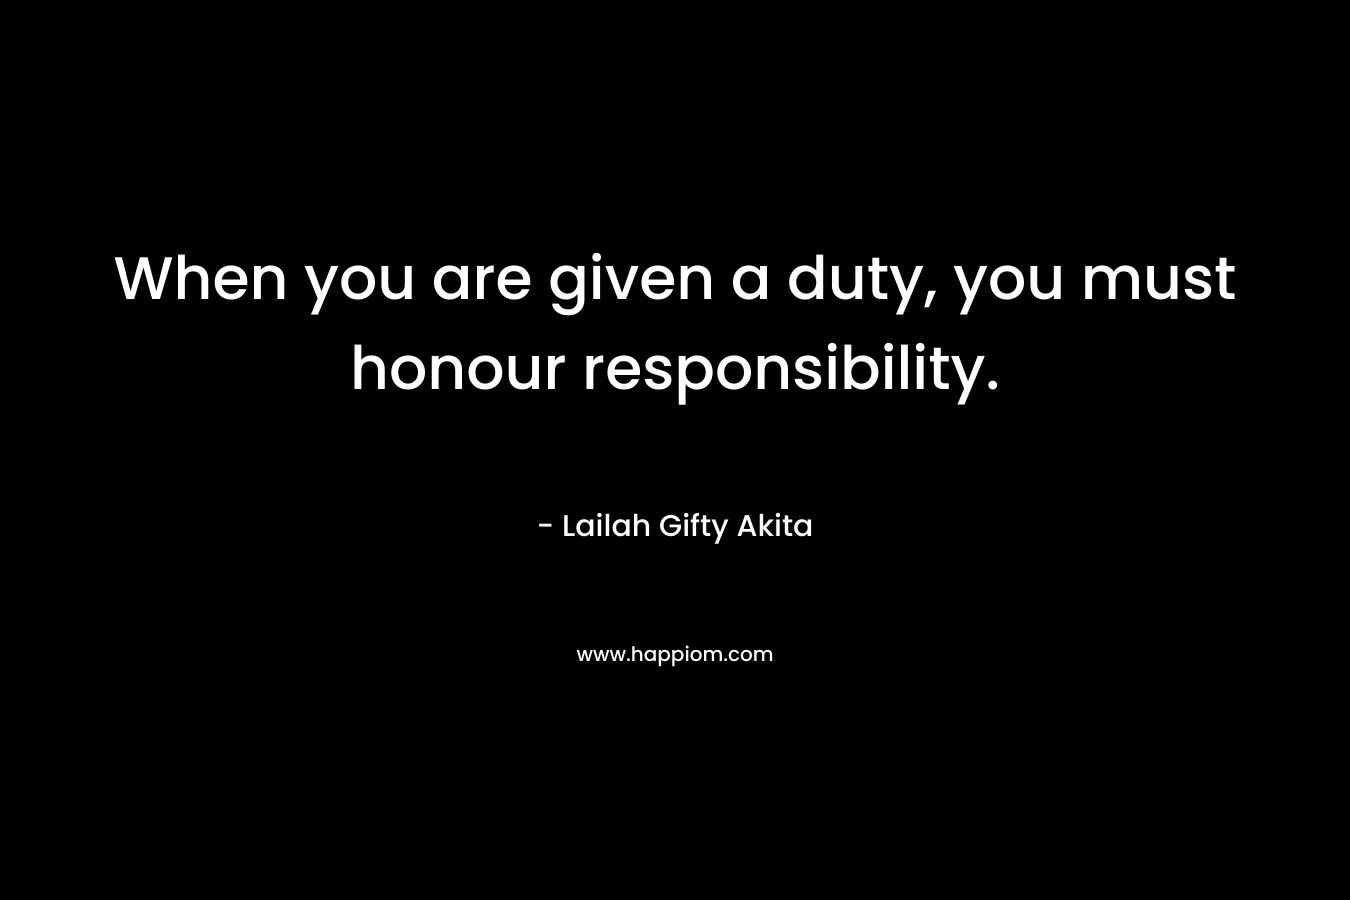 When you are given a duty, you must honour responsibility.